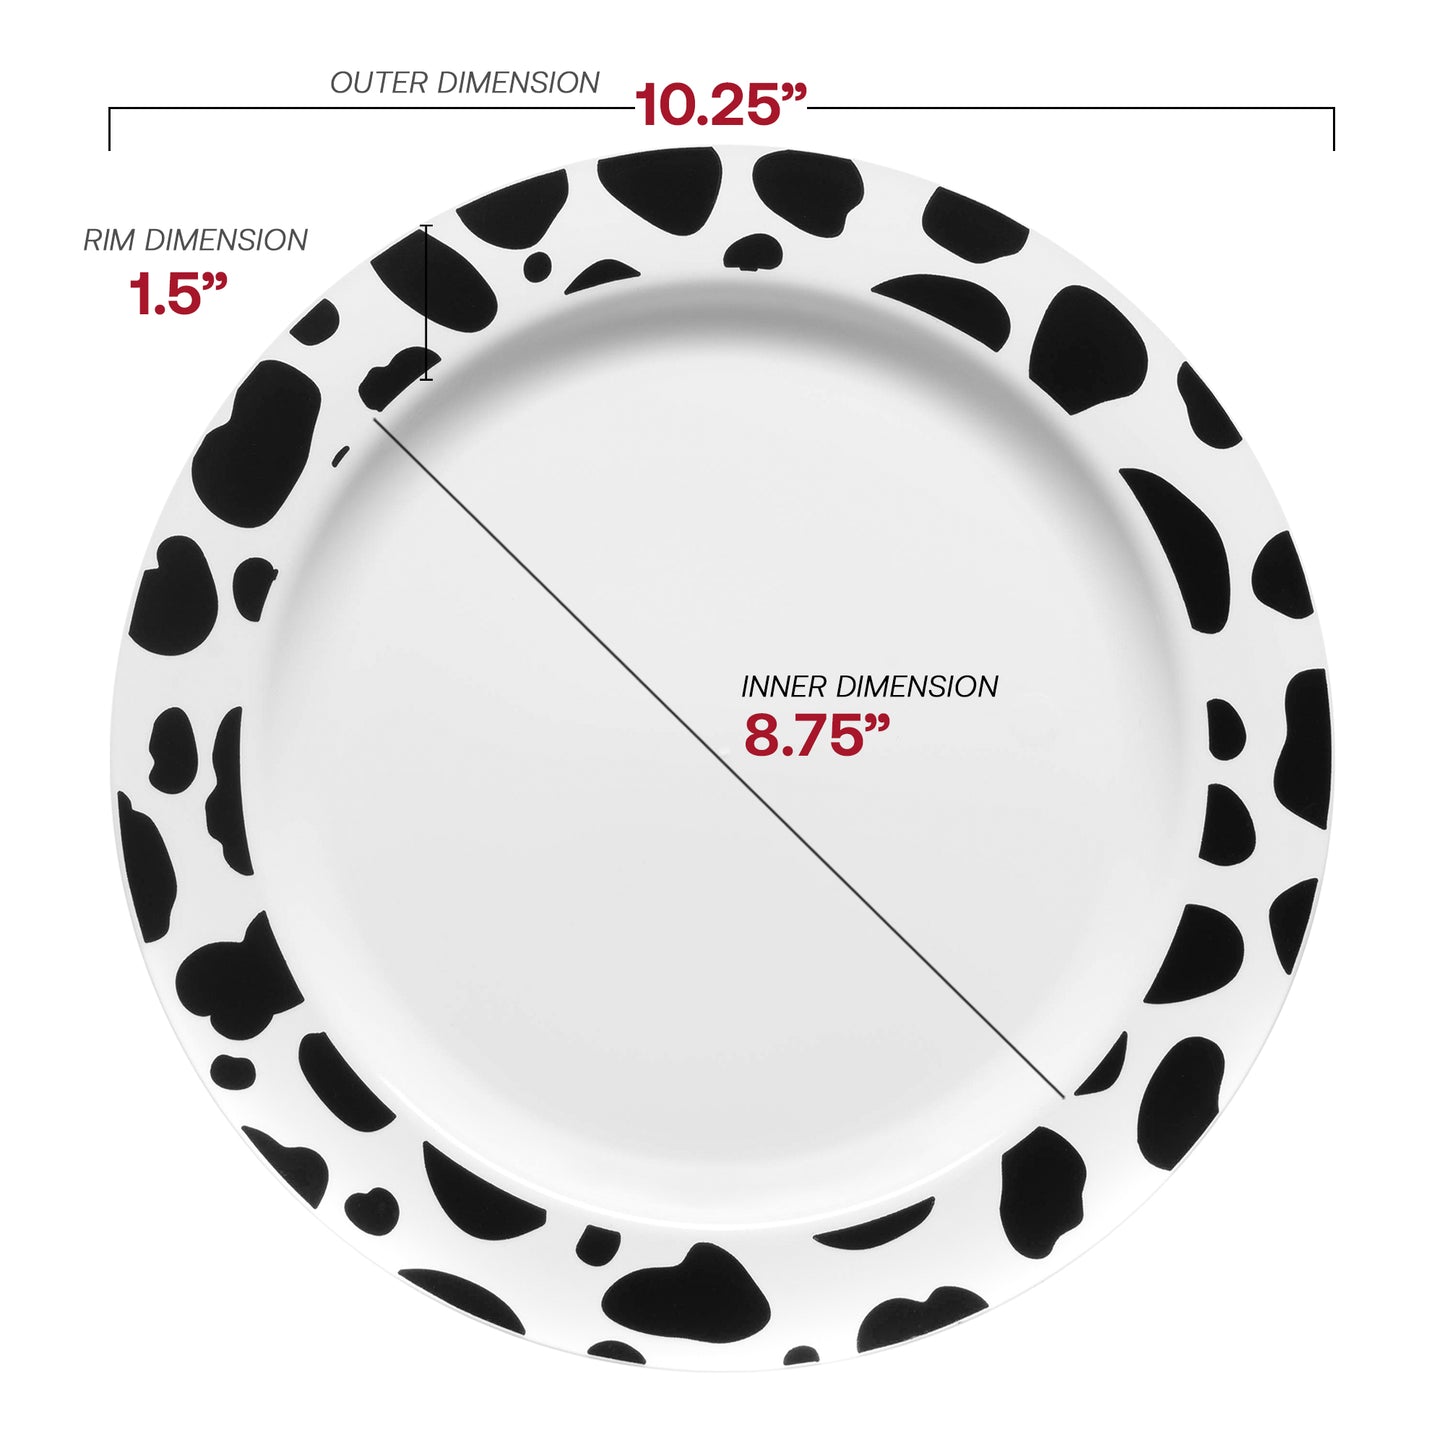 White with Black Dalmatian Spots Round Disposable Plastic Dinner Plates (10.25") Dimension | The Kaya Collection